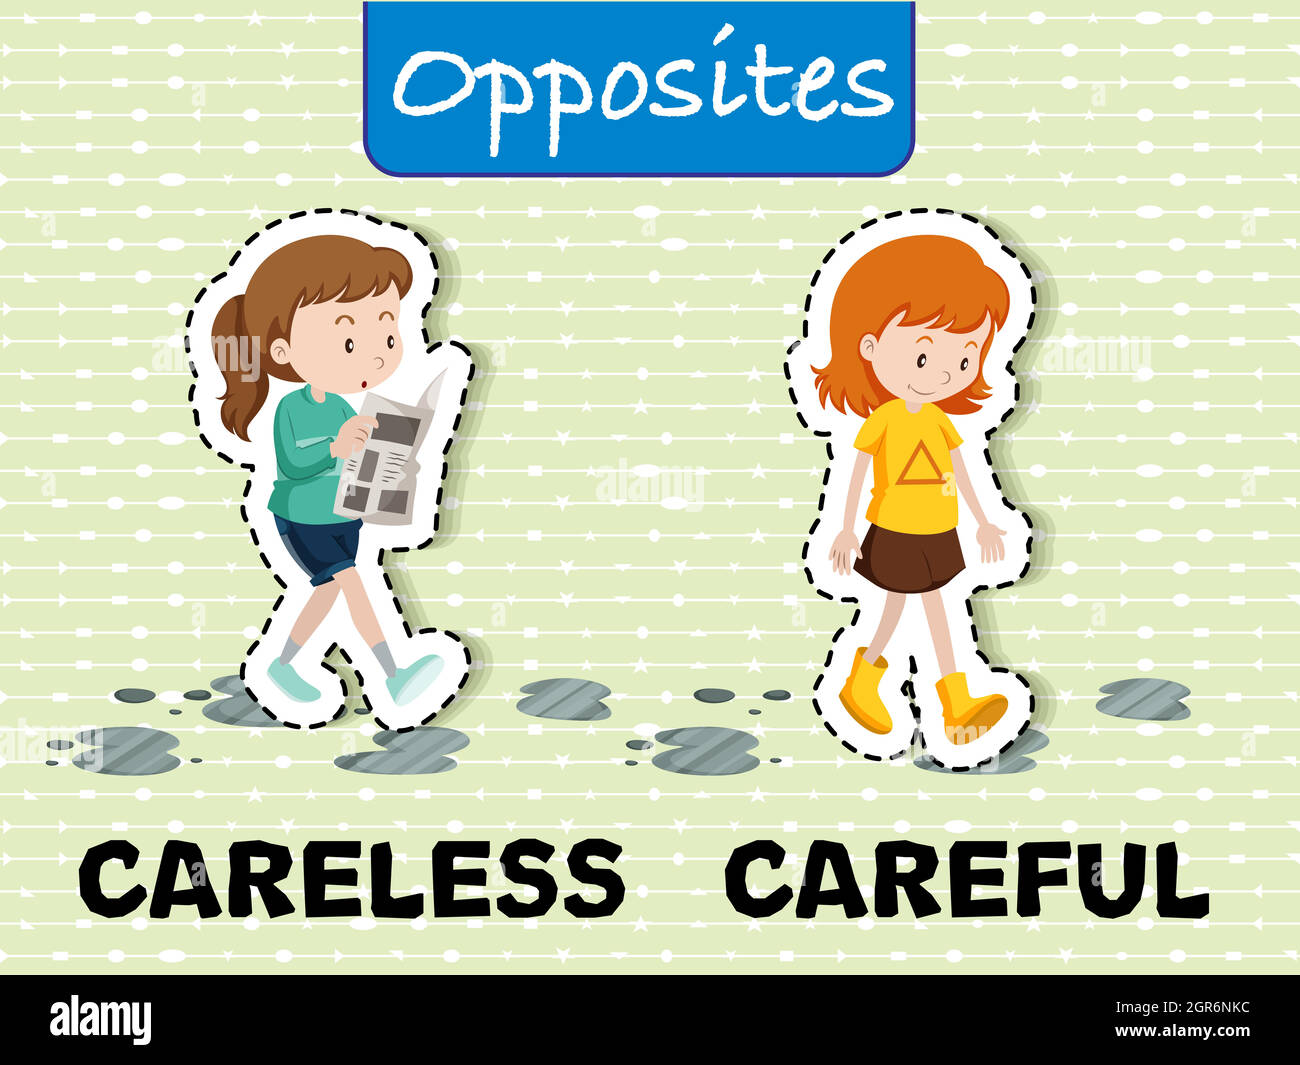 Careless and Careful Opposite Words Stock Vector